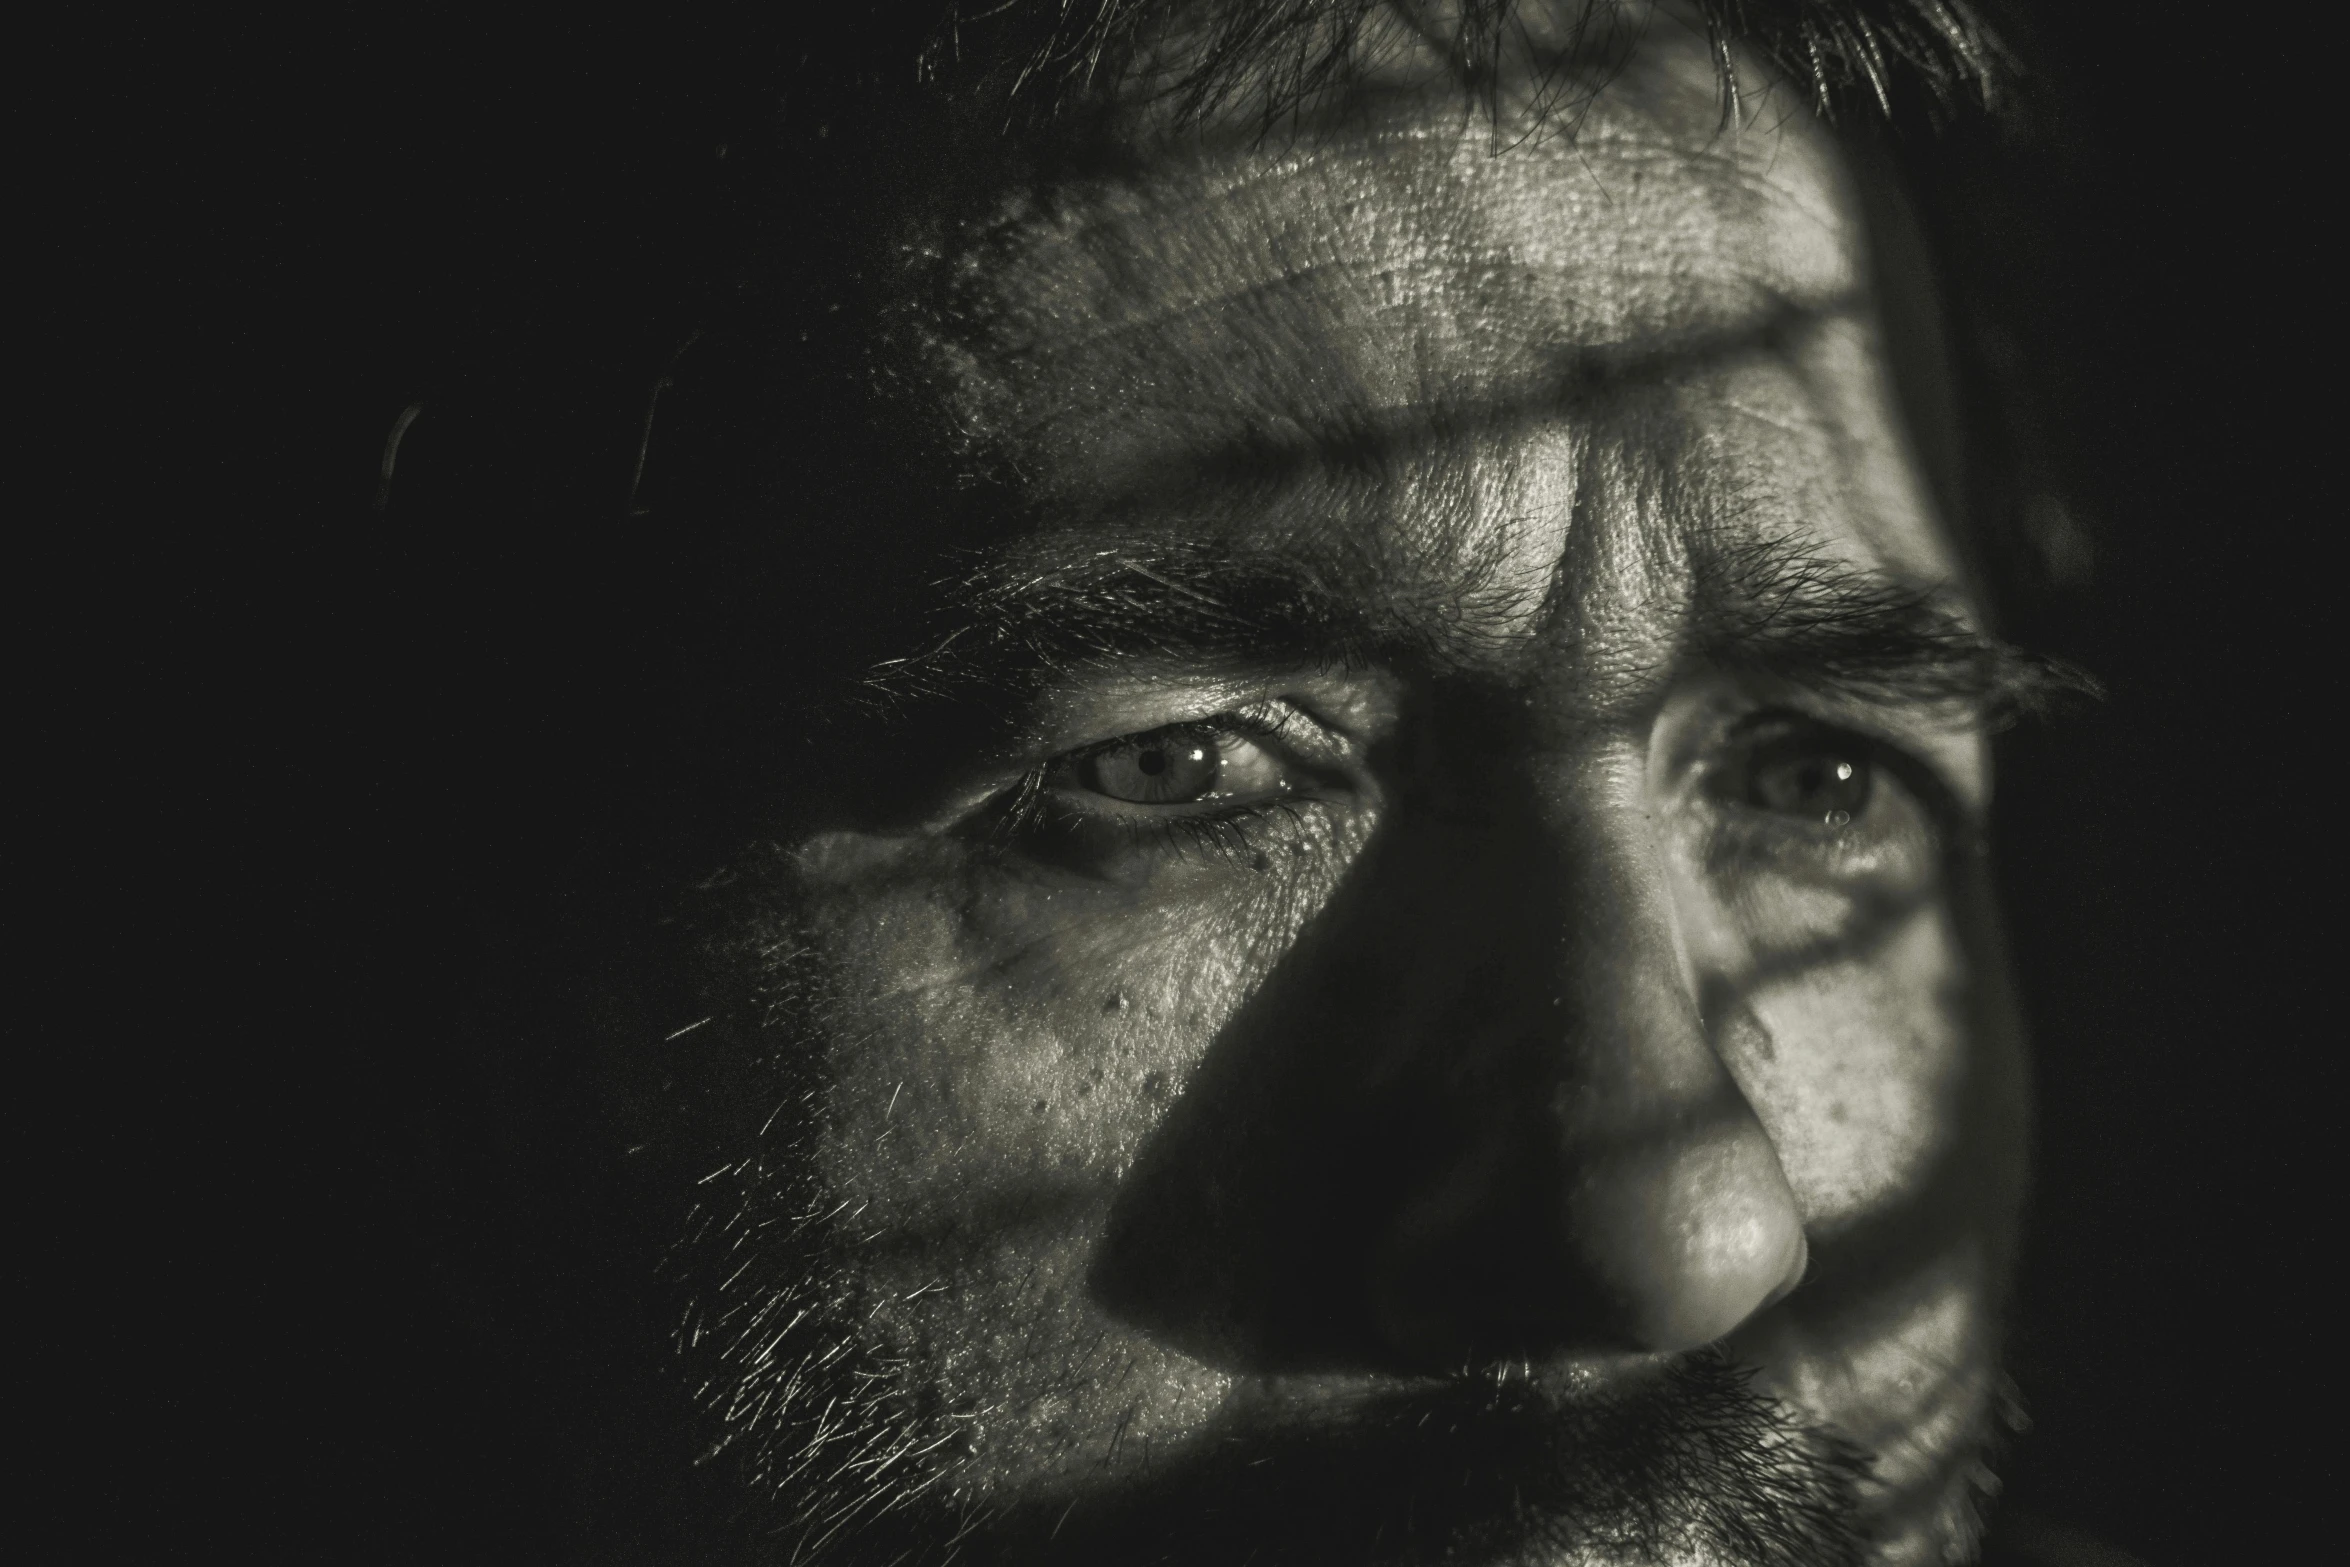 a black and white photo of a man with a beard, pexels contest winner, photorealism, faces covered in shadows, sad eyes, face is brightly lit, promo image